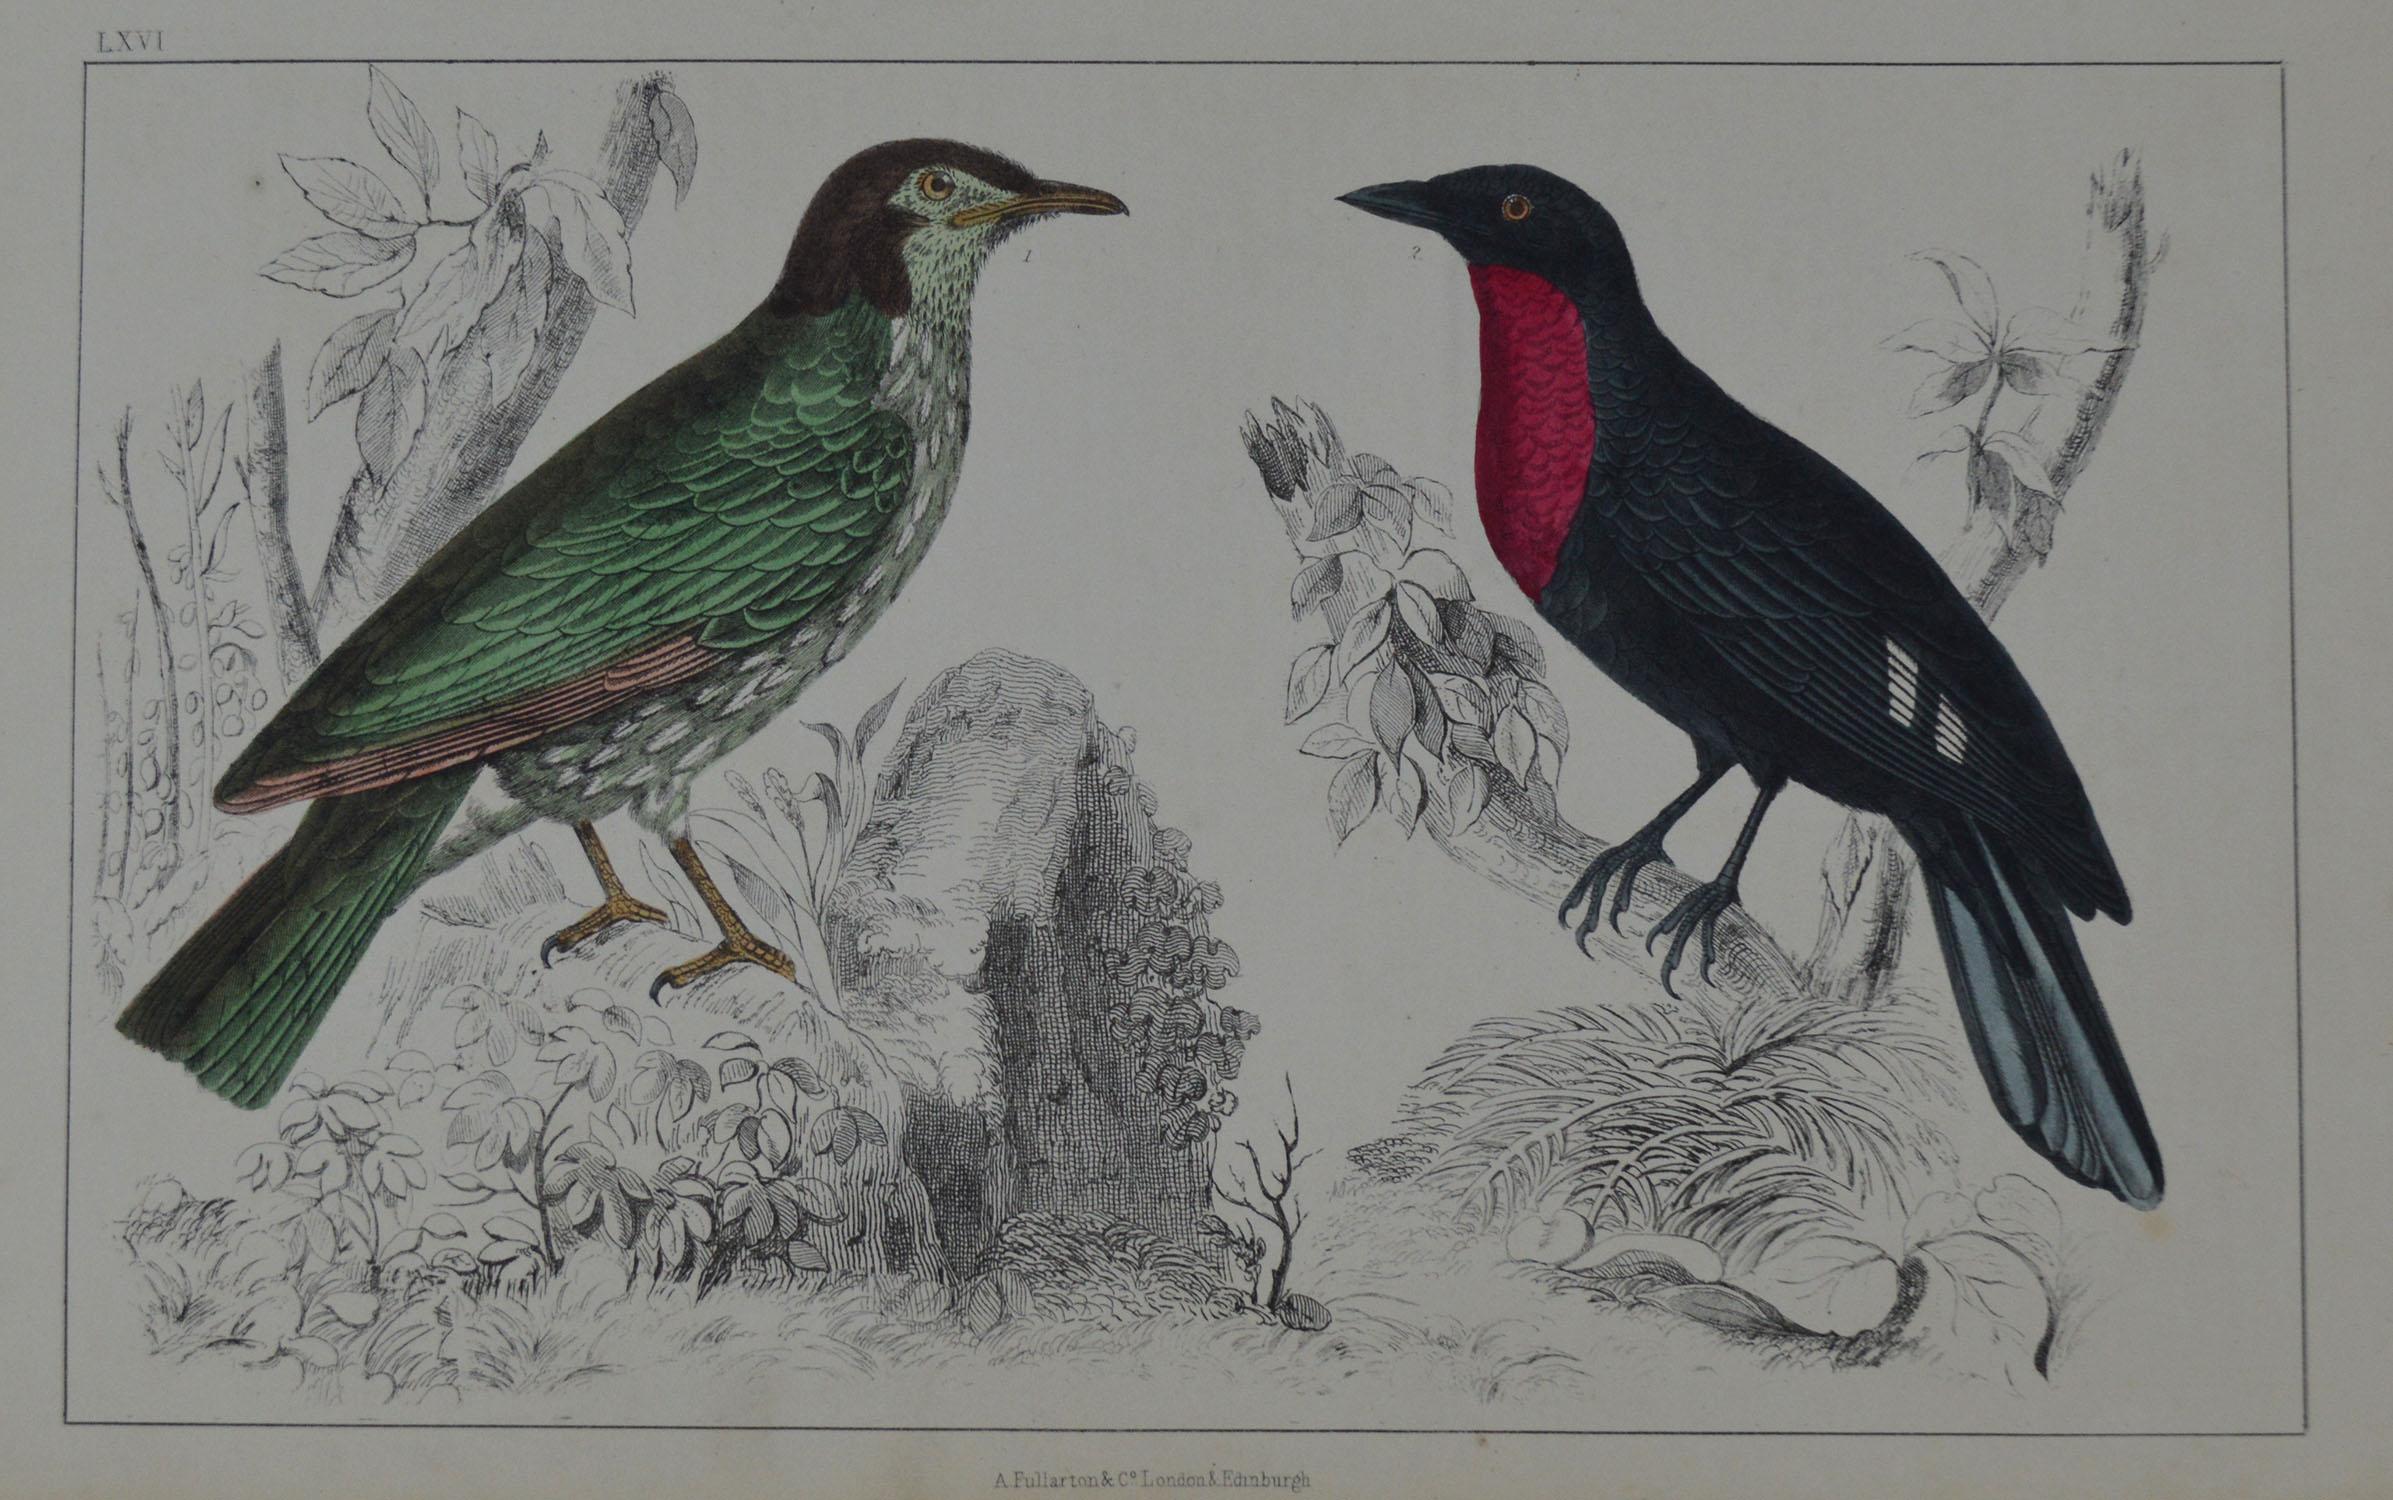 Great image of a red breasted bird and another.

I have listed several loose natural history prints in the same series.

Unframed. It gives you the option of perhaps making a set up using your own choice of frames.

Lithograph after Cpt. Brown